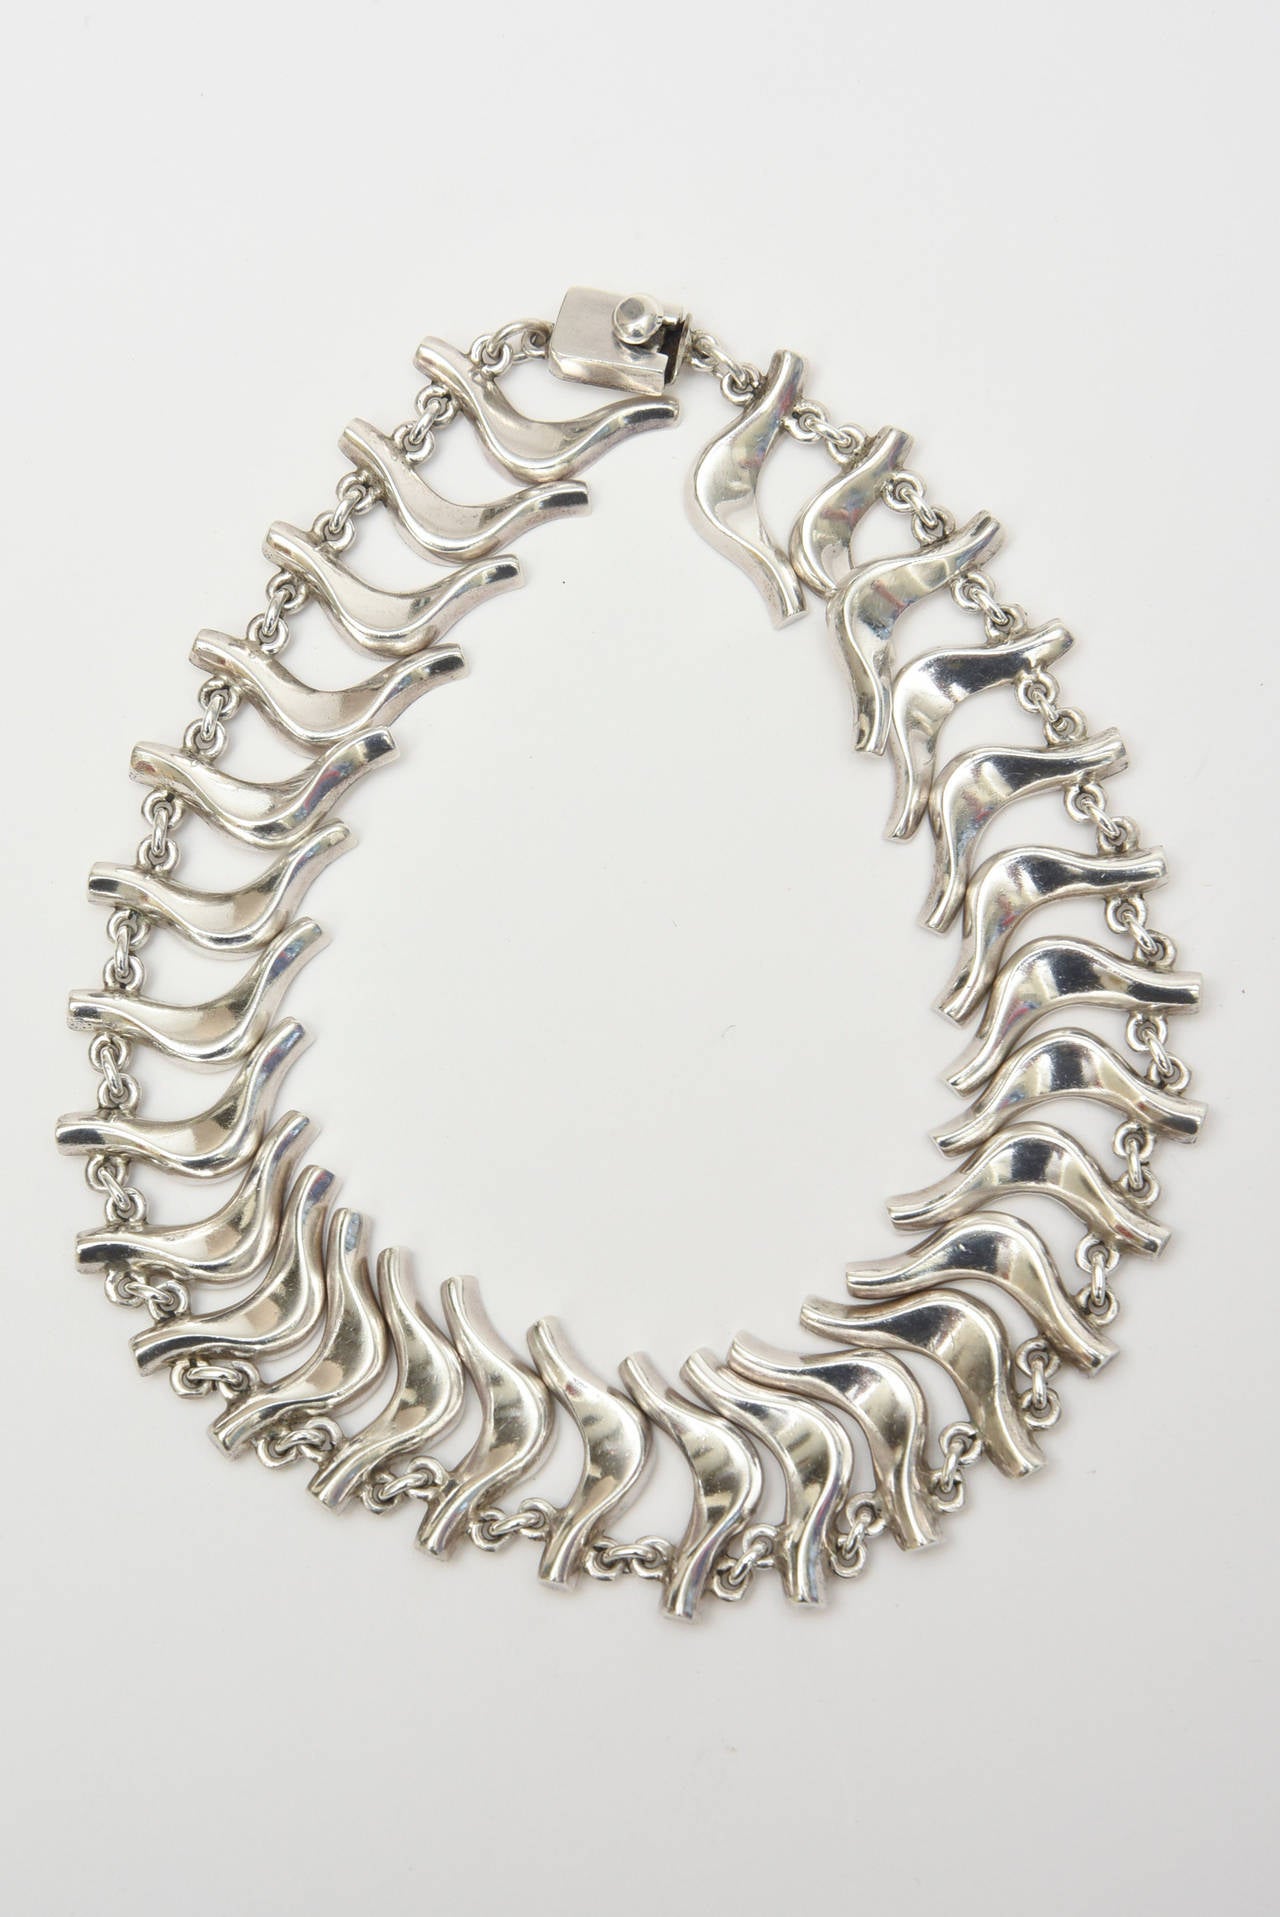 This set of a sterling silver vintage Mexican Collar necklace and bracelet has abstract dancer like forms. It is hallmarked 